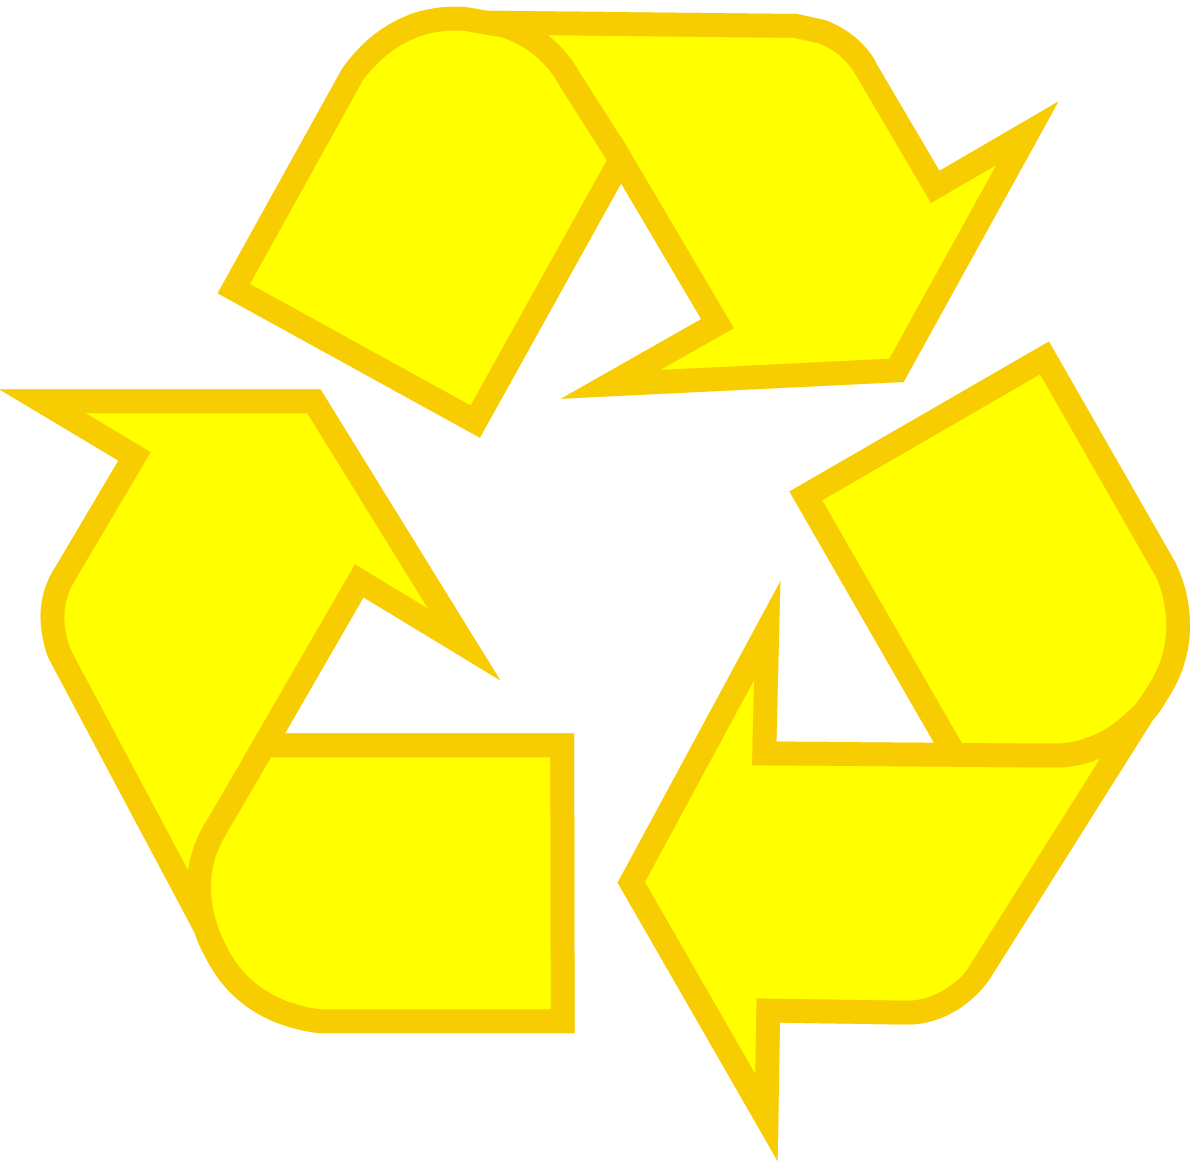 Orange and Yellow Logo - Recycling Symbol - Download the Original Recycle Logo